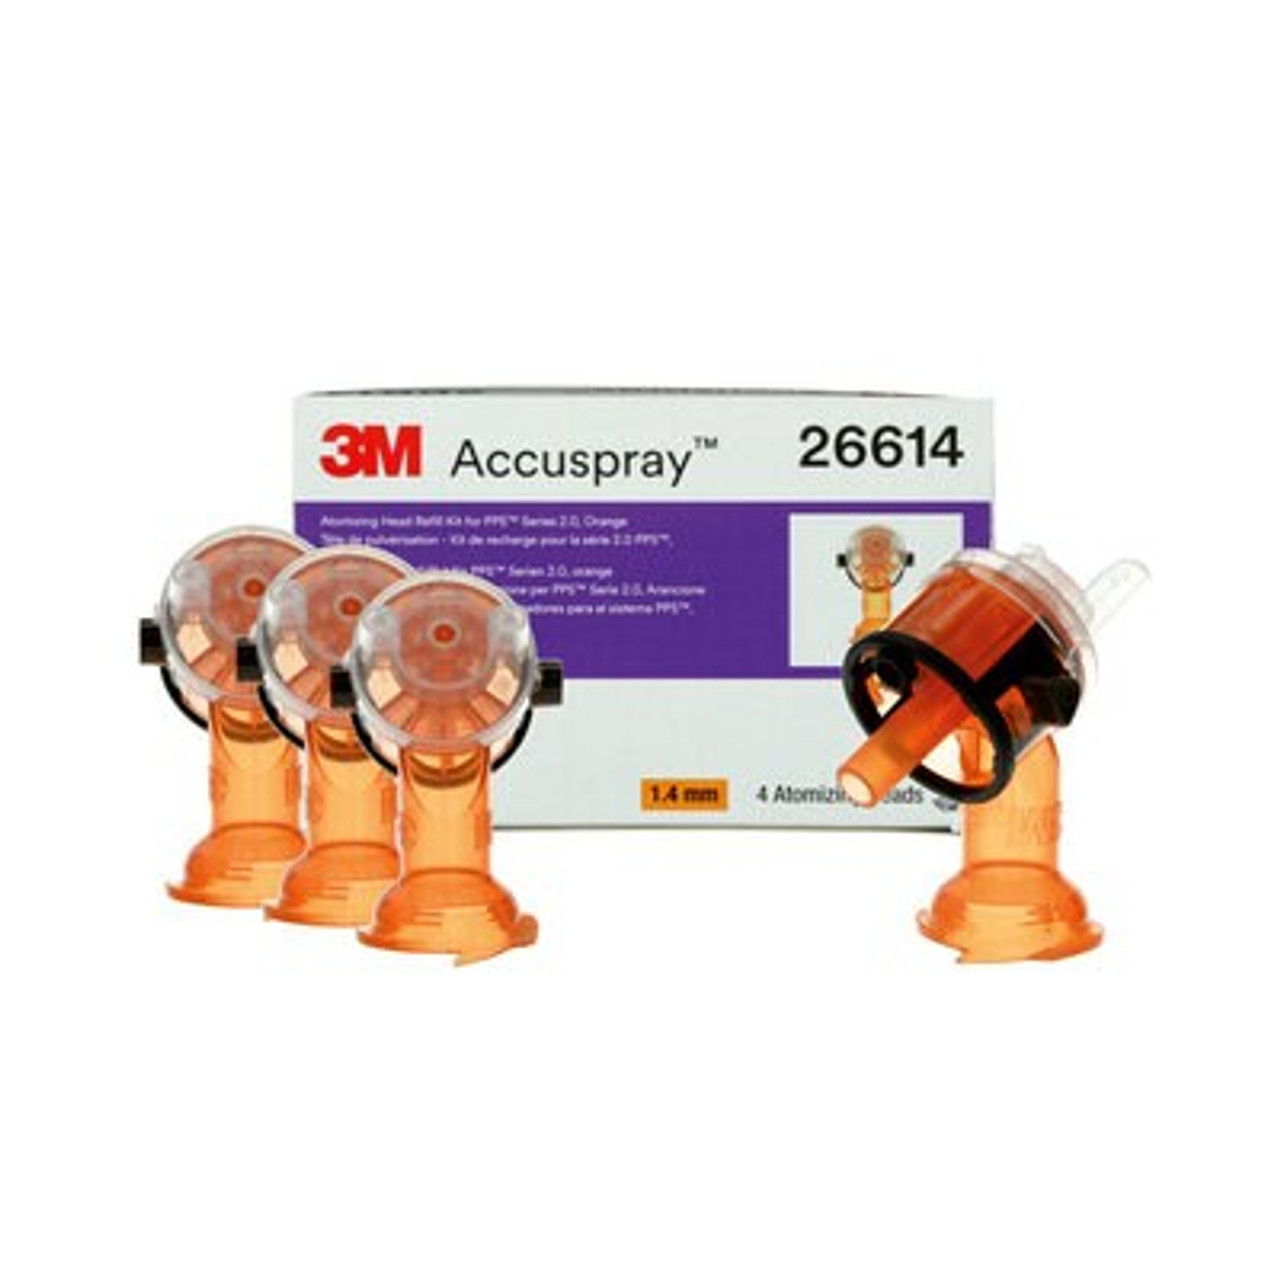 3M™ Accuspray™ Atomizing Head Refill Pack for 3M™ PPS™ Series 2.0, 26614, Orange, 1.4 mm, 4 nozzles per pack